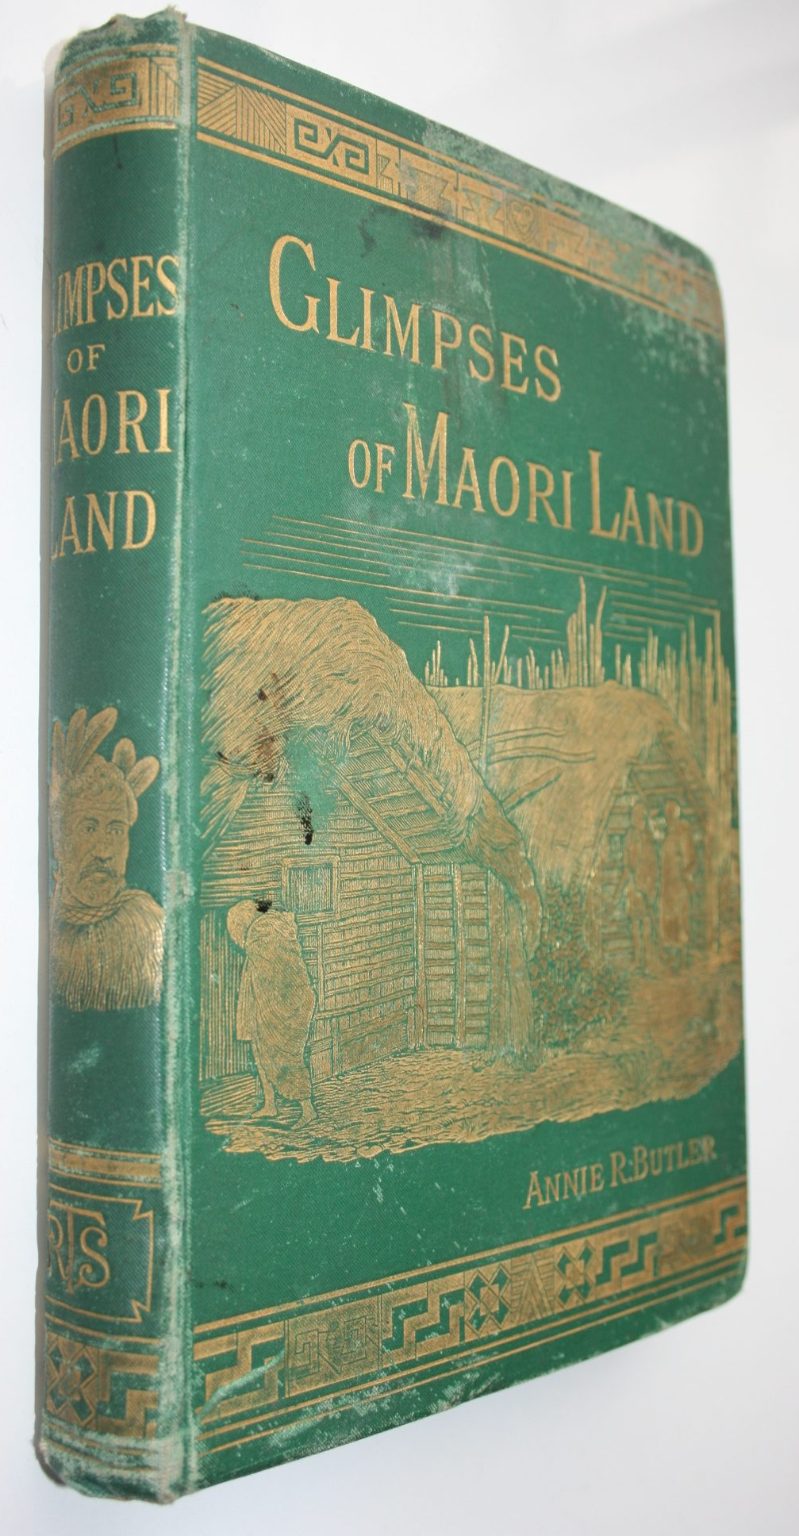 Glimpses of Maori Land by Annie R. Butler. (1886)